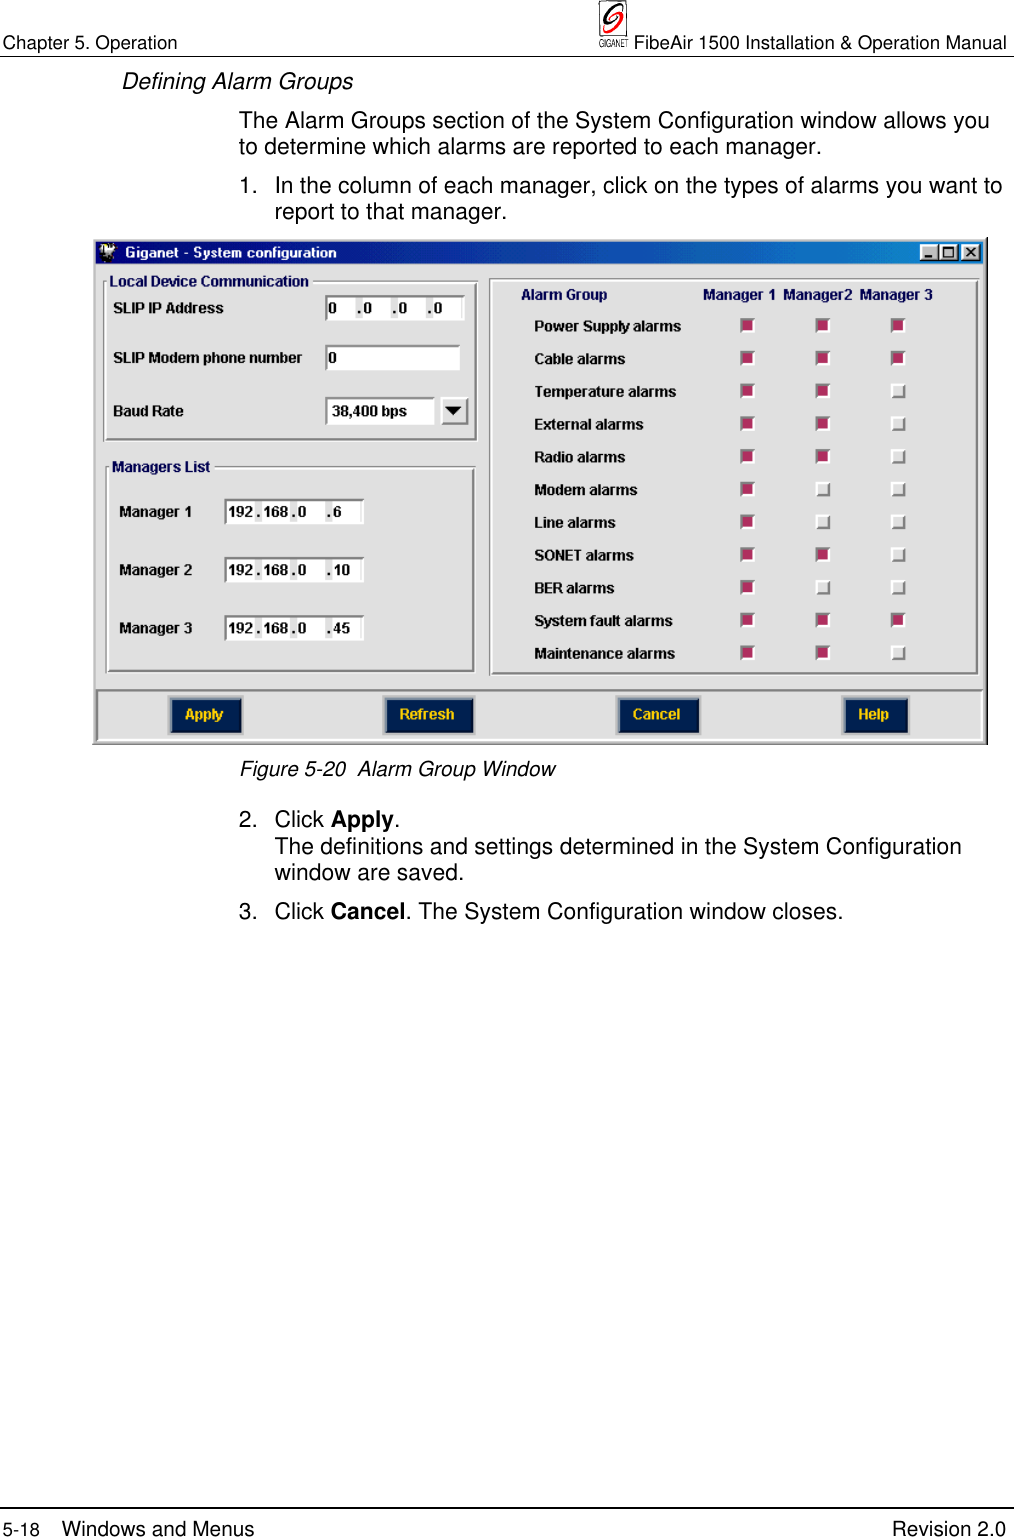 Chapter 5. Operation  FibeAir 1500 Installation &amp; Operation Manual5-18 Windows and Menus Revision 2.0Defining Alarm GroupsThe Alarm Groups section of the System Configuration window allows youto determine which alarms are reported to each manager.1. In the column of each manager, click on the types of alarms you want toreport to that manager.Figure 5-20  Alarm Group Window2. Click Apply.The definitions and settings determined in the System Configurationwindow are saved.3. Click Cancel. The System Configuration window closes.